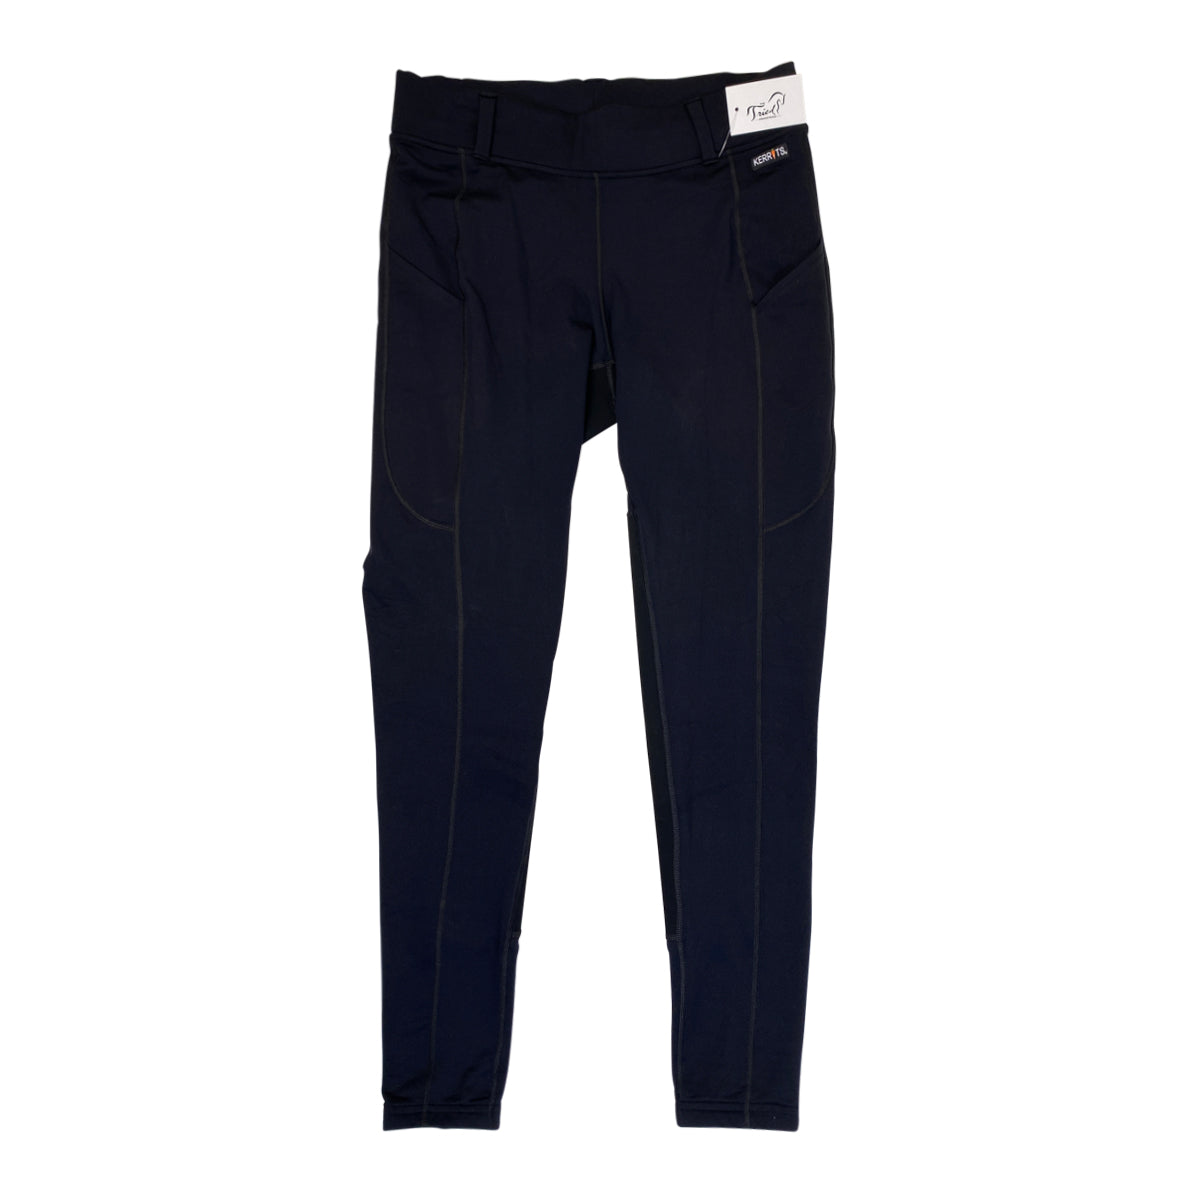 Kerrits &#39;Crossover&#39; Full Seat Breeches in Black